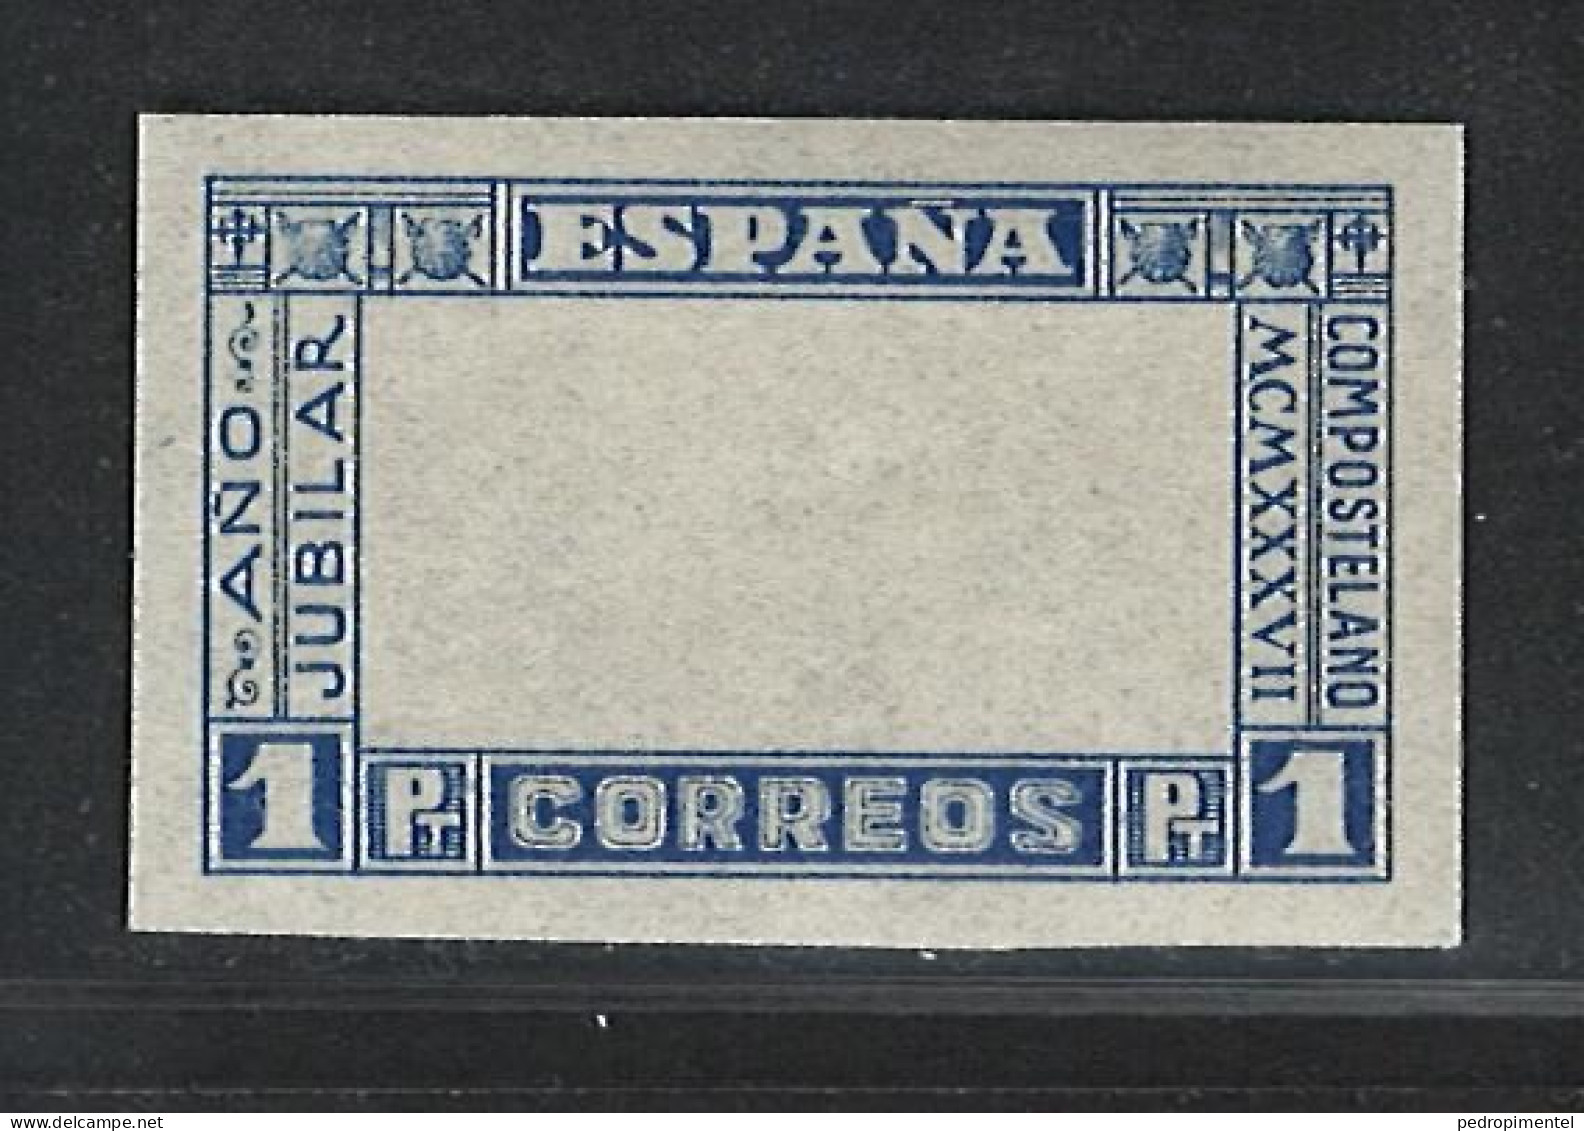 Spain Stamps | 1937 | Ano Jubilar Frame |  MNH Unperforated - Nuovi